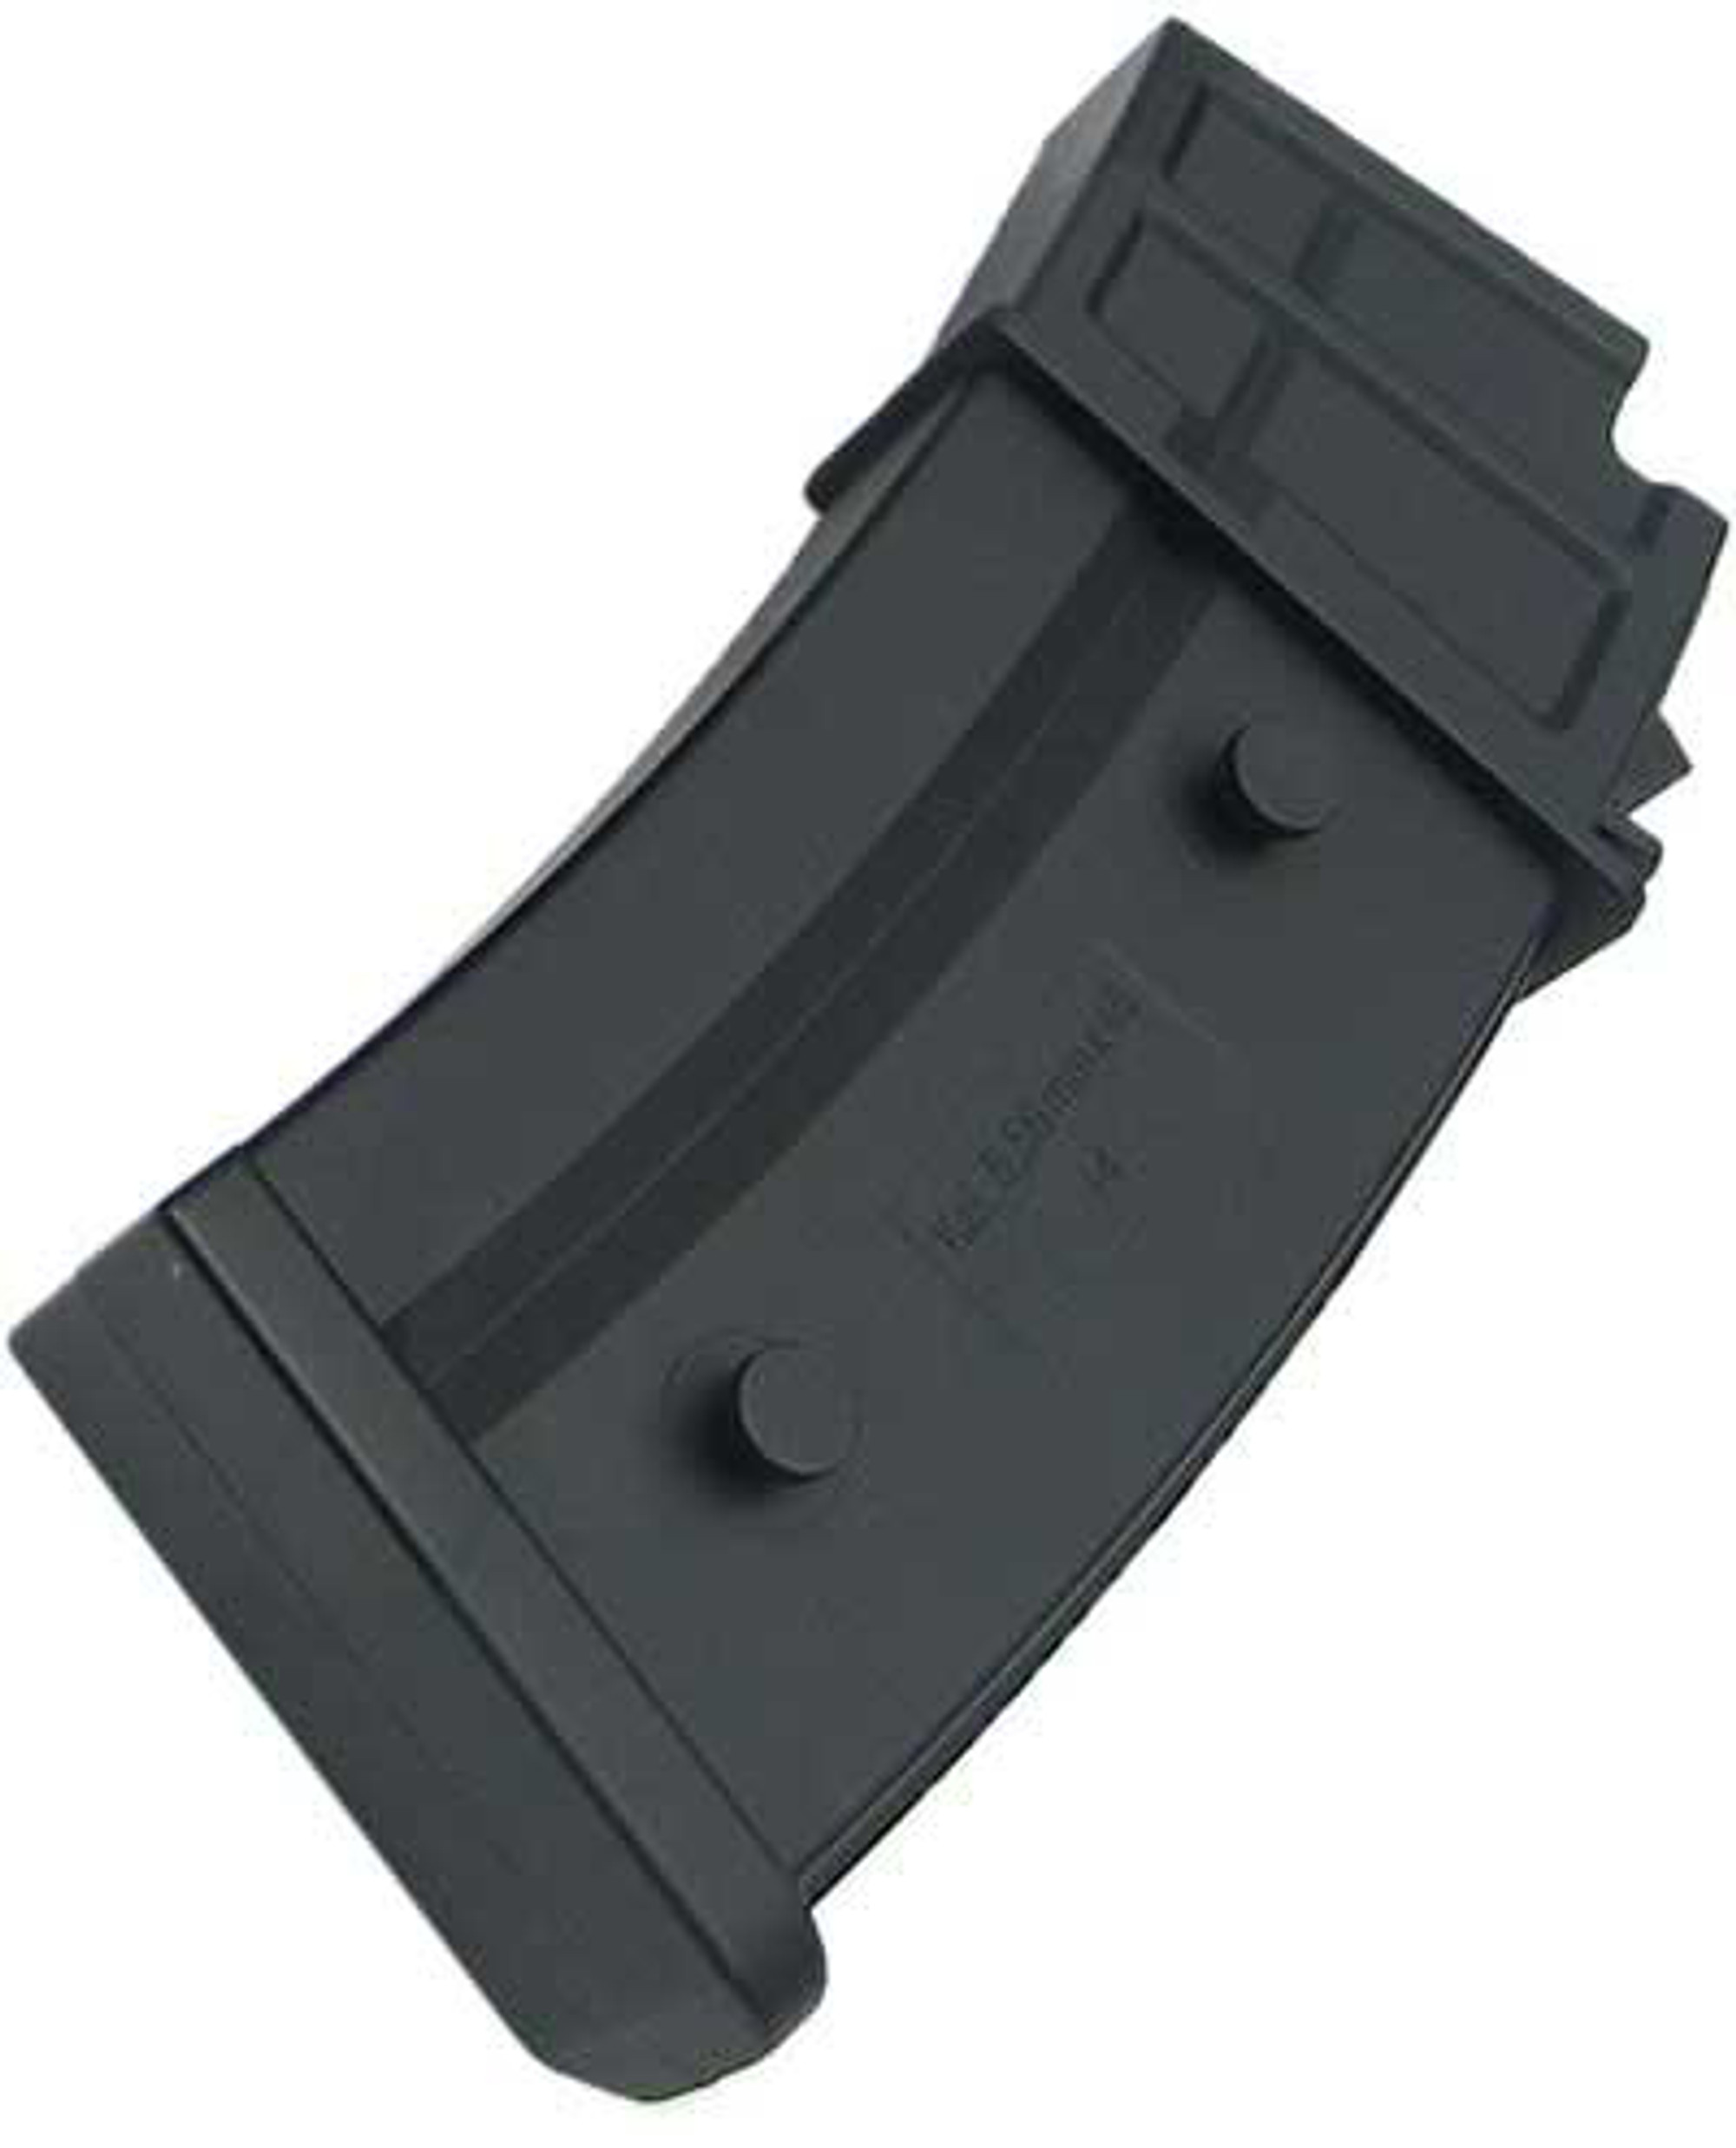 King Arms 50rd Mid-Capacity Magazine for G36 Series AEG (Package: One)